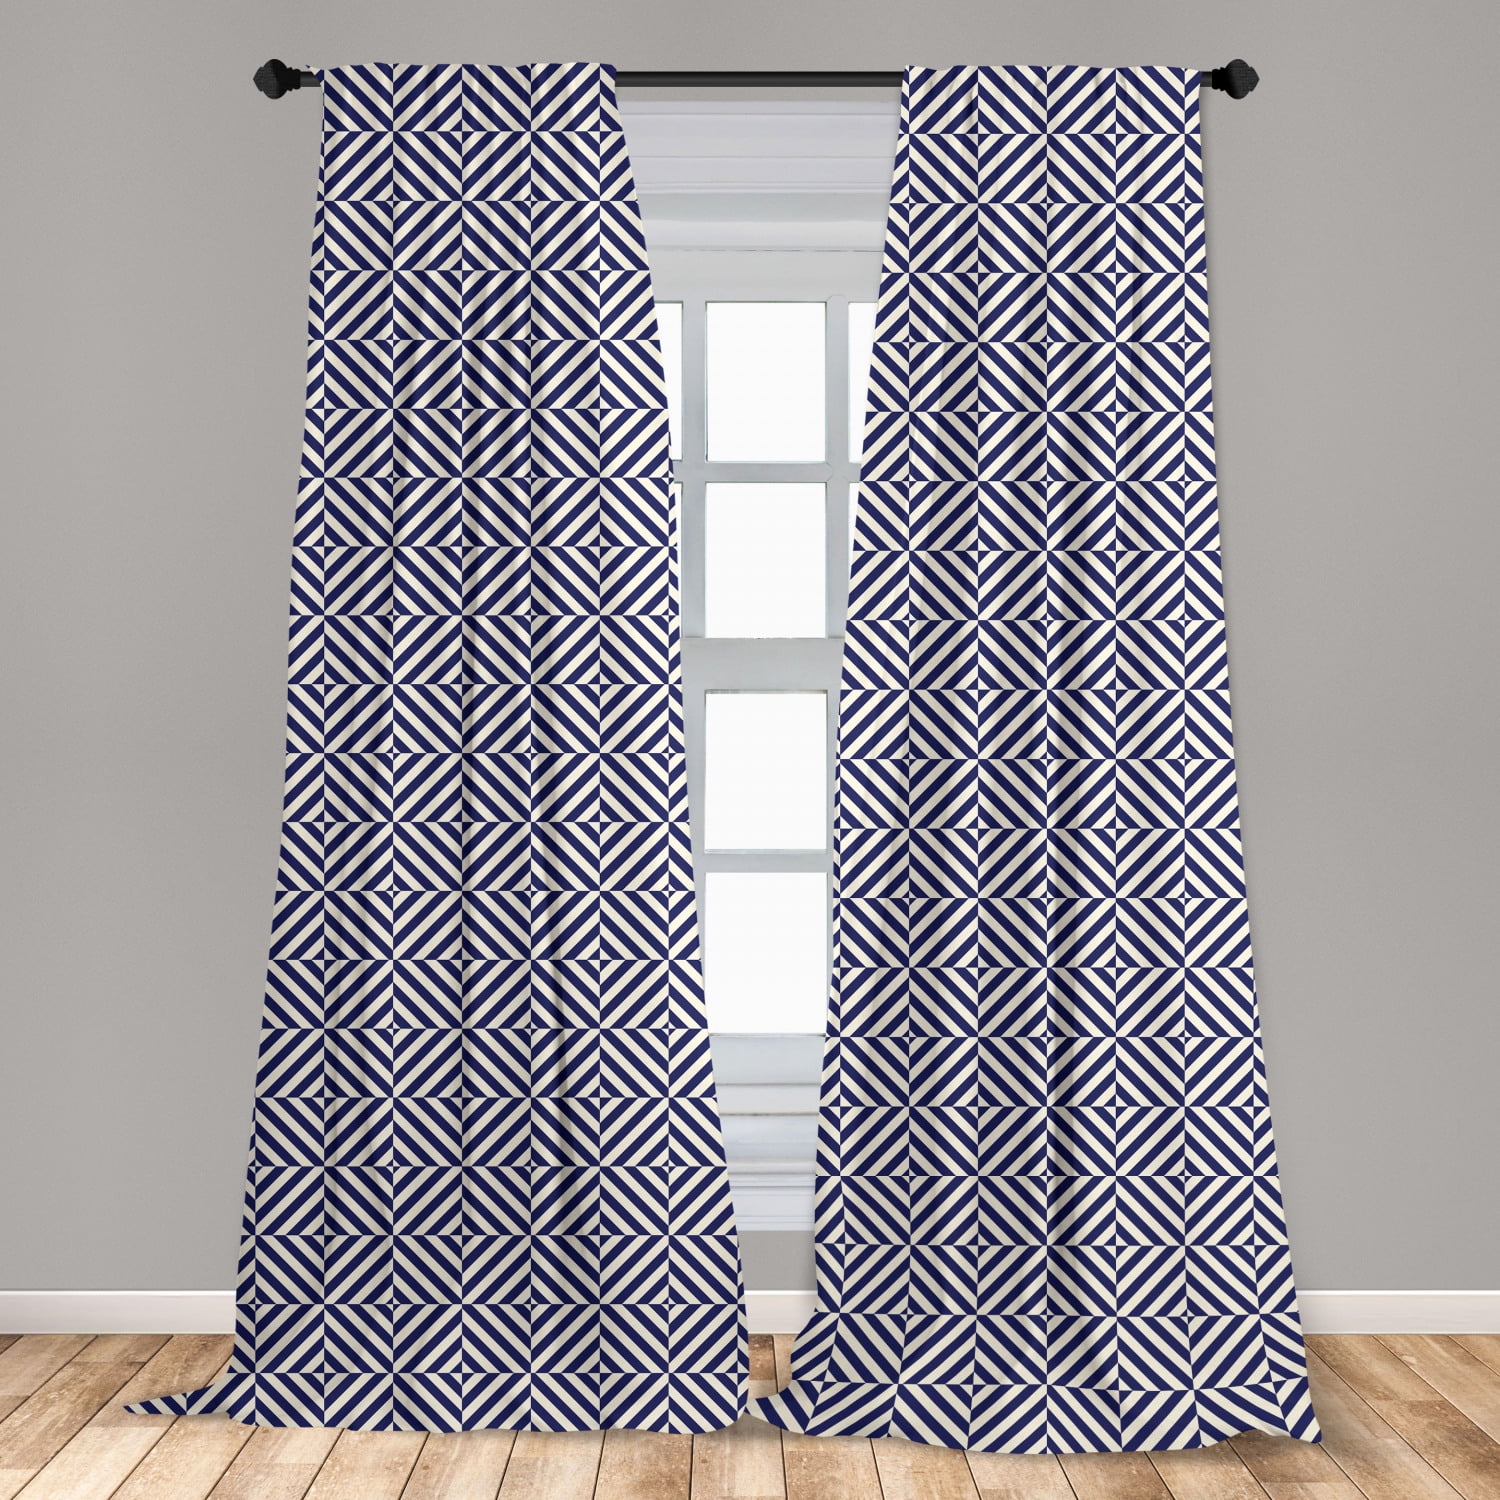 Navy Curtains 2 Panel Set Decor 5 Sizes Available Window Drapes Ambesonne 